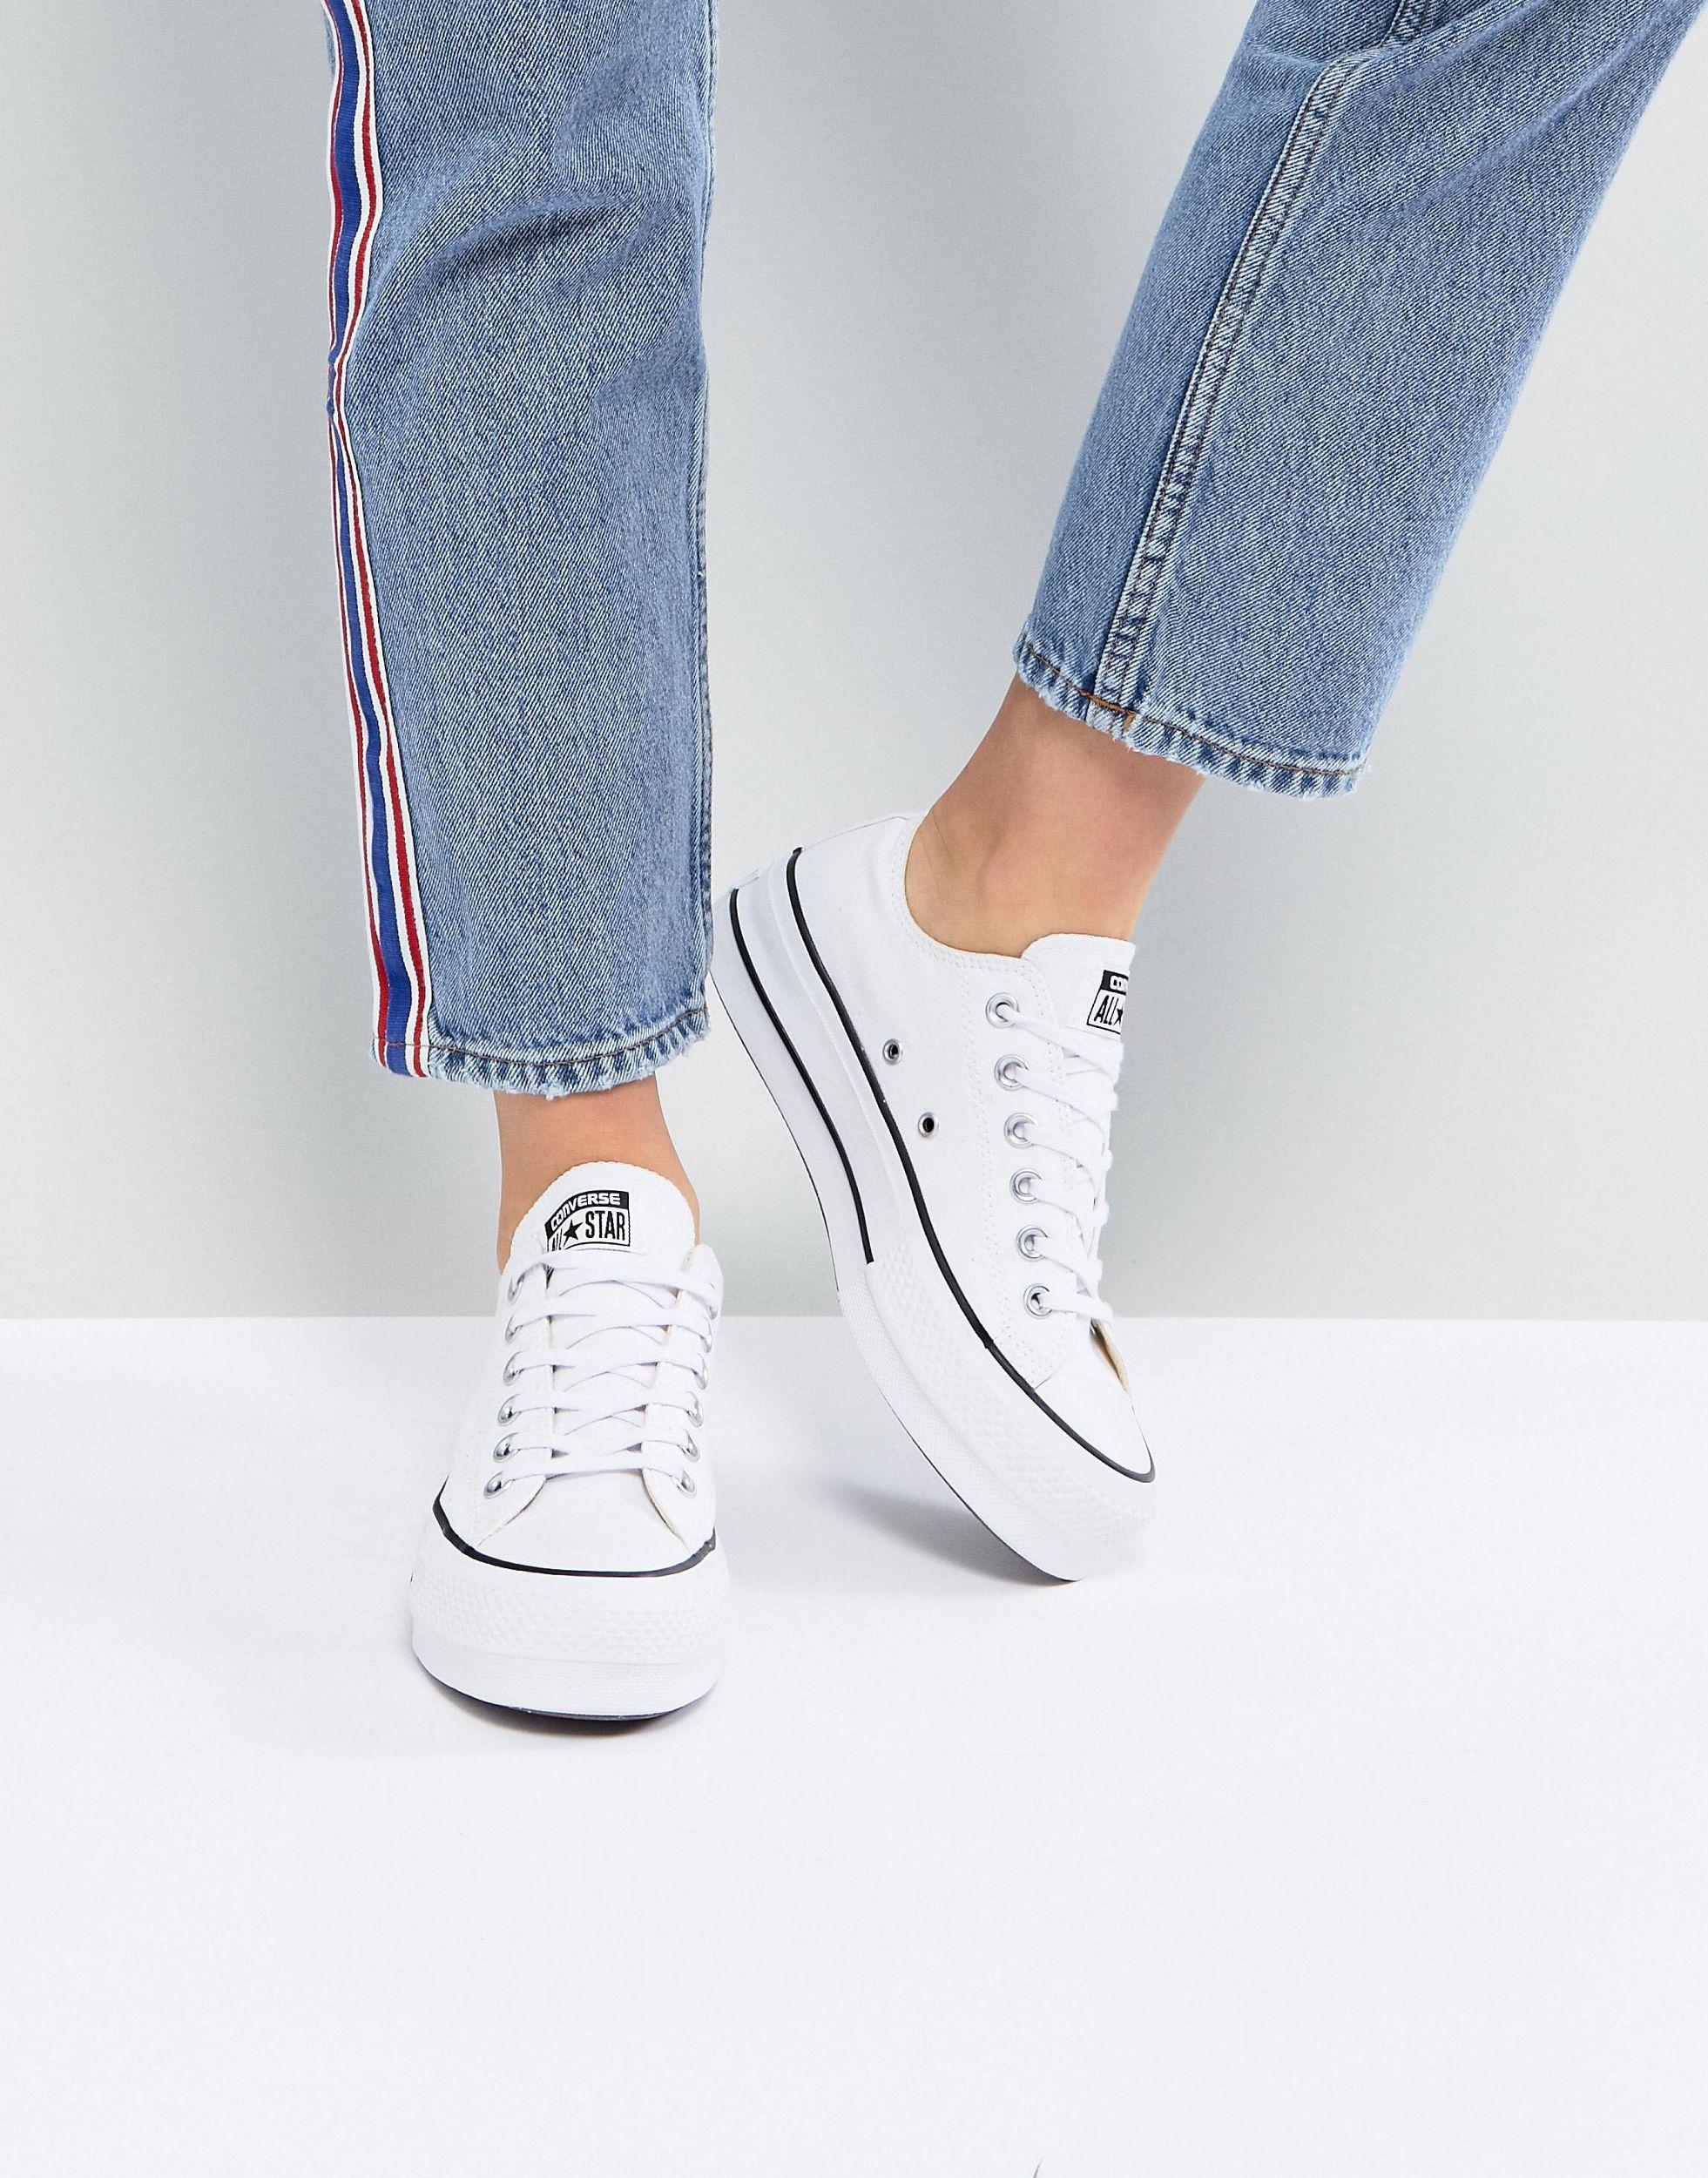 Converse Chuck Taylor All Star Ox Canvas Platform Sneakers in ... تغليف هدايا غريب